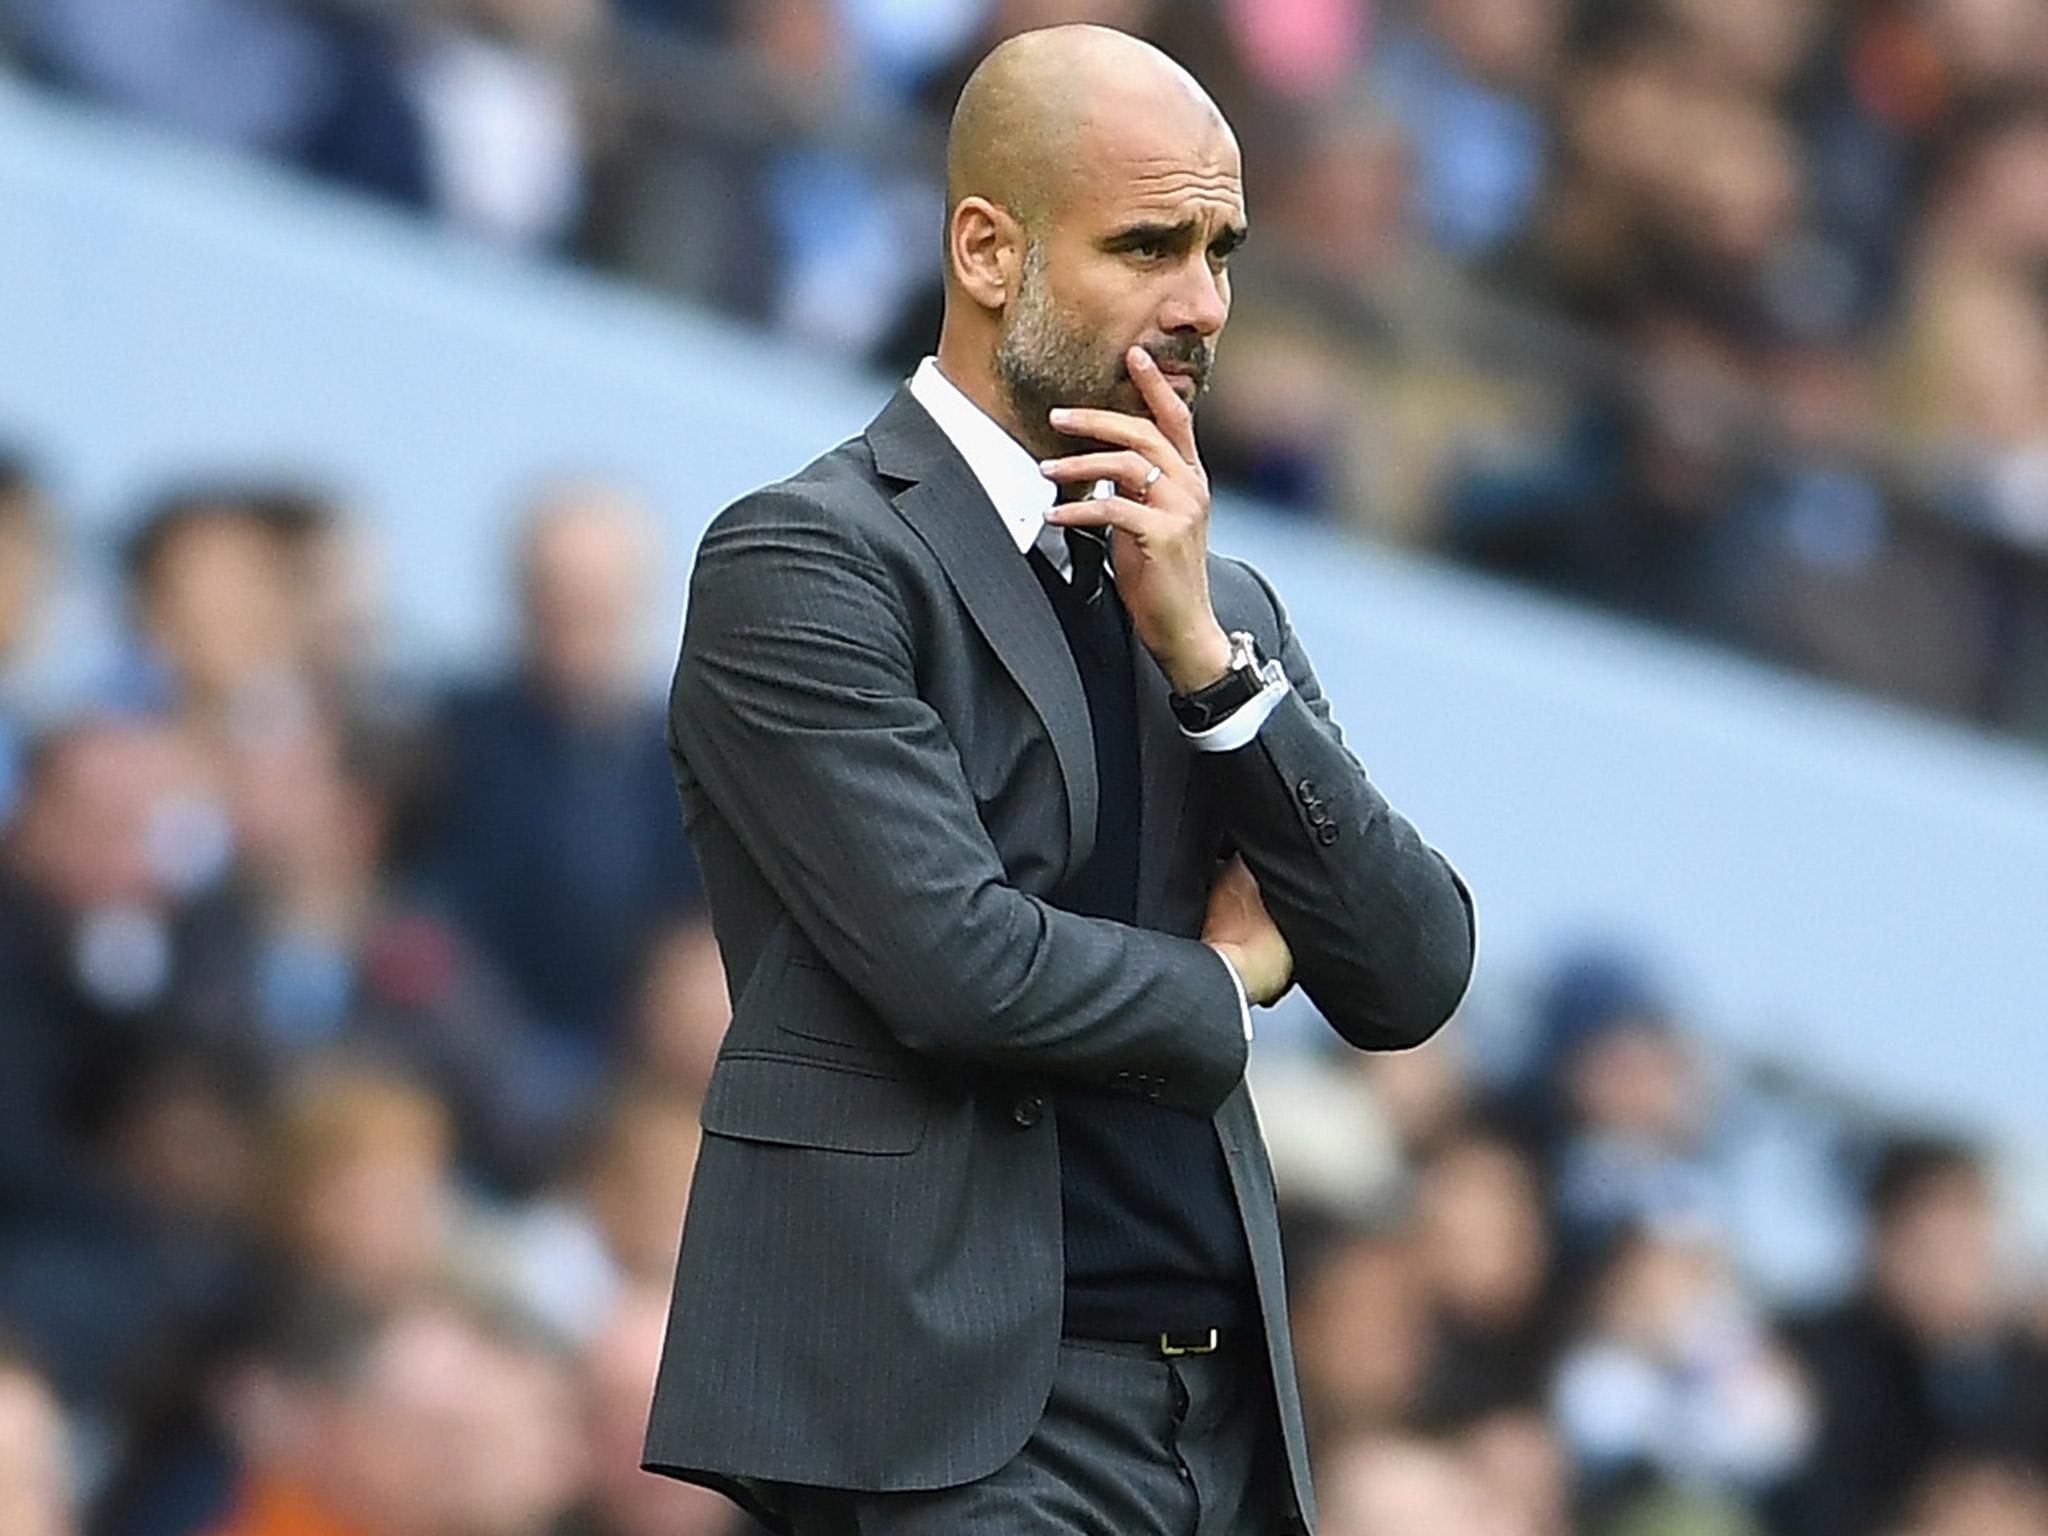 Pep Guardiola watches on as Manchester City are held to a 1-1 draw with Southampton